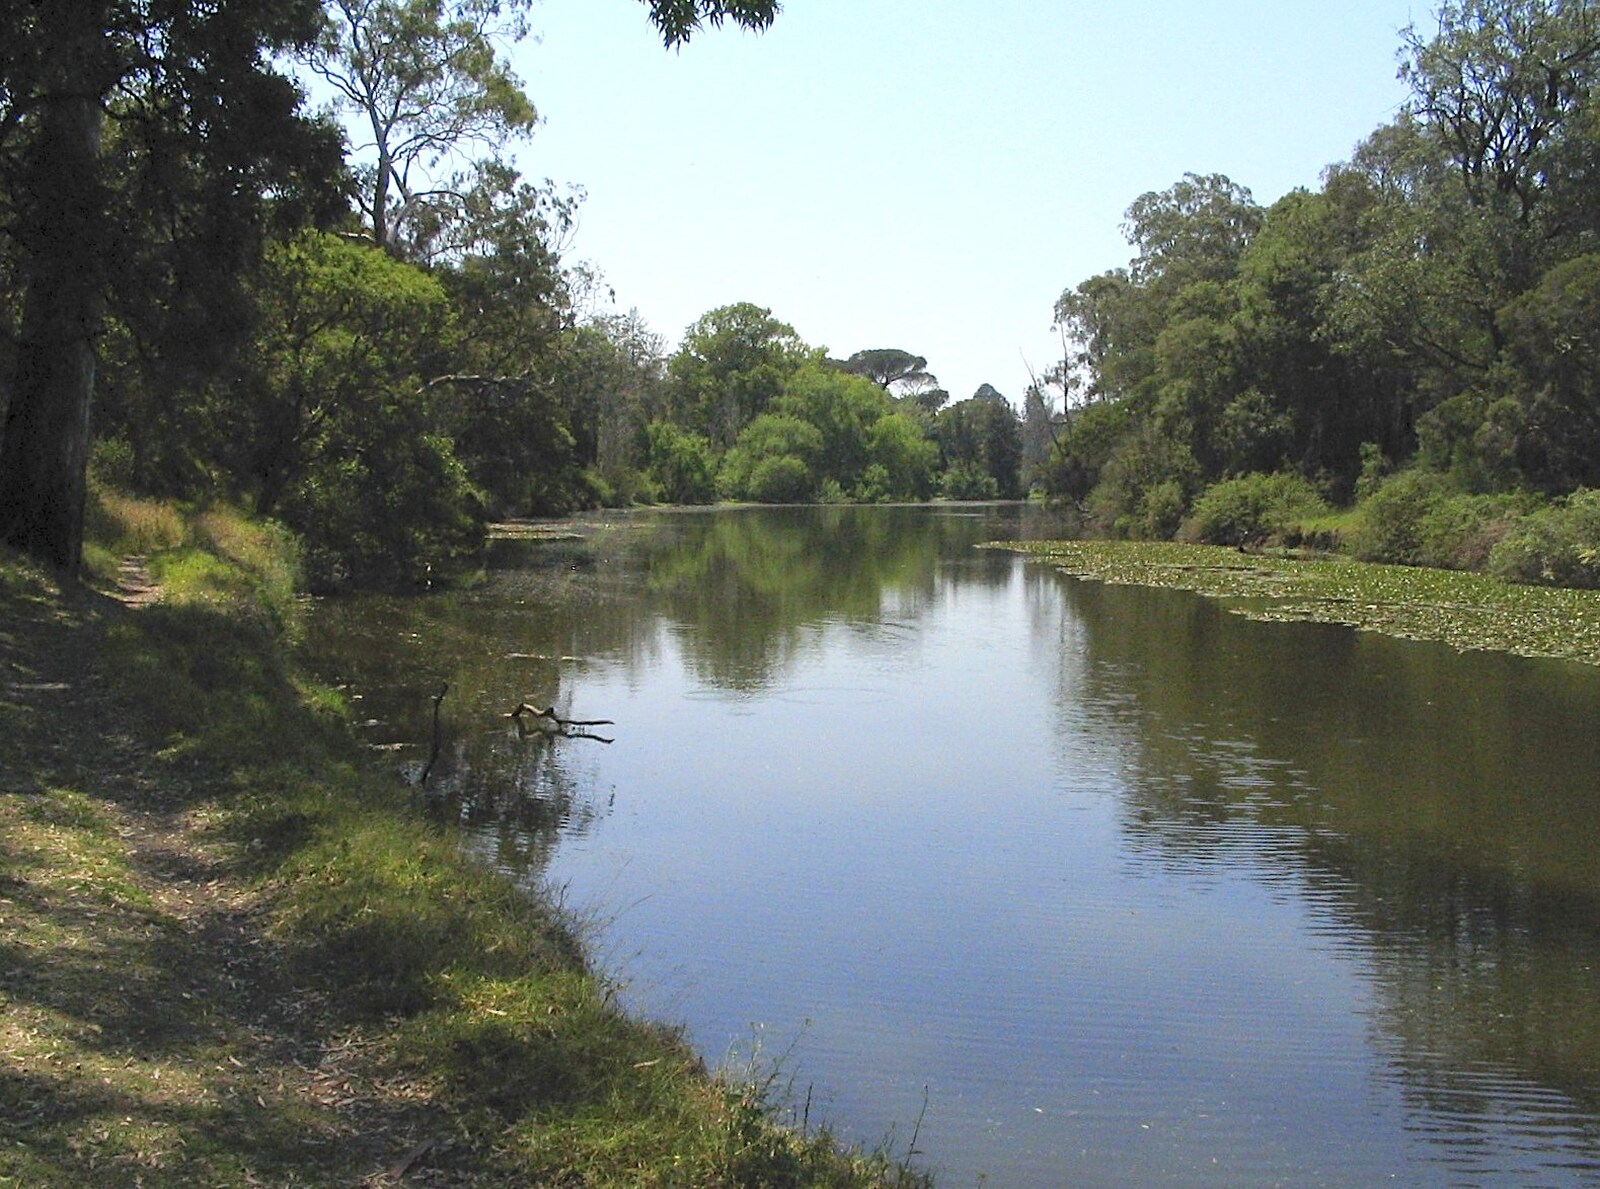 A lake in Parramatta park from Sydney, New South Wales, Australia - 10th October 2004